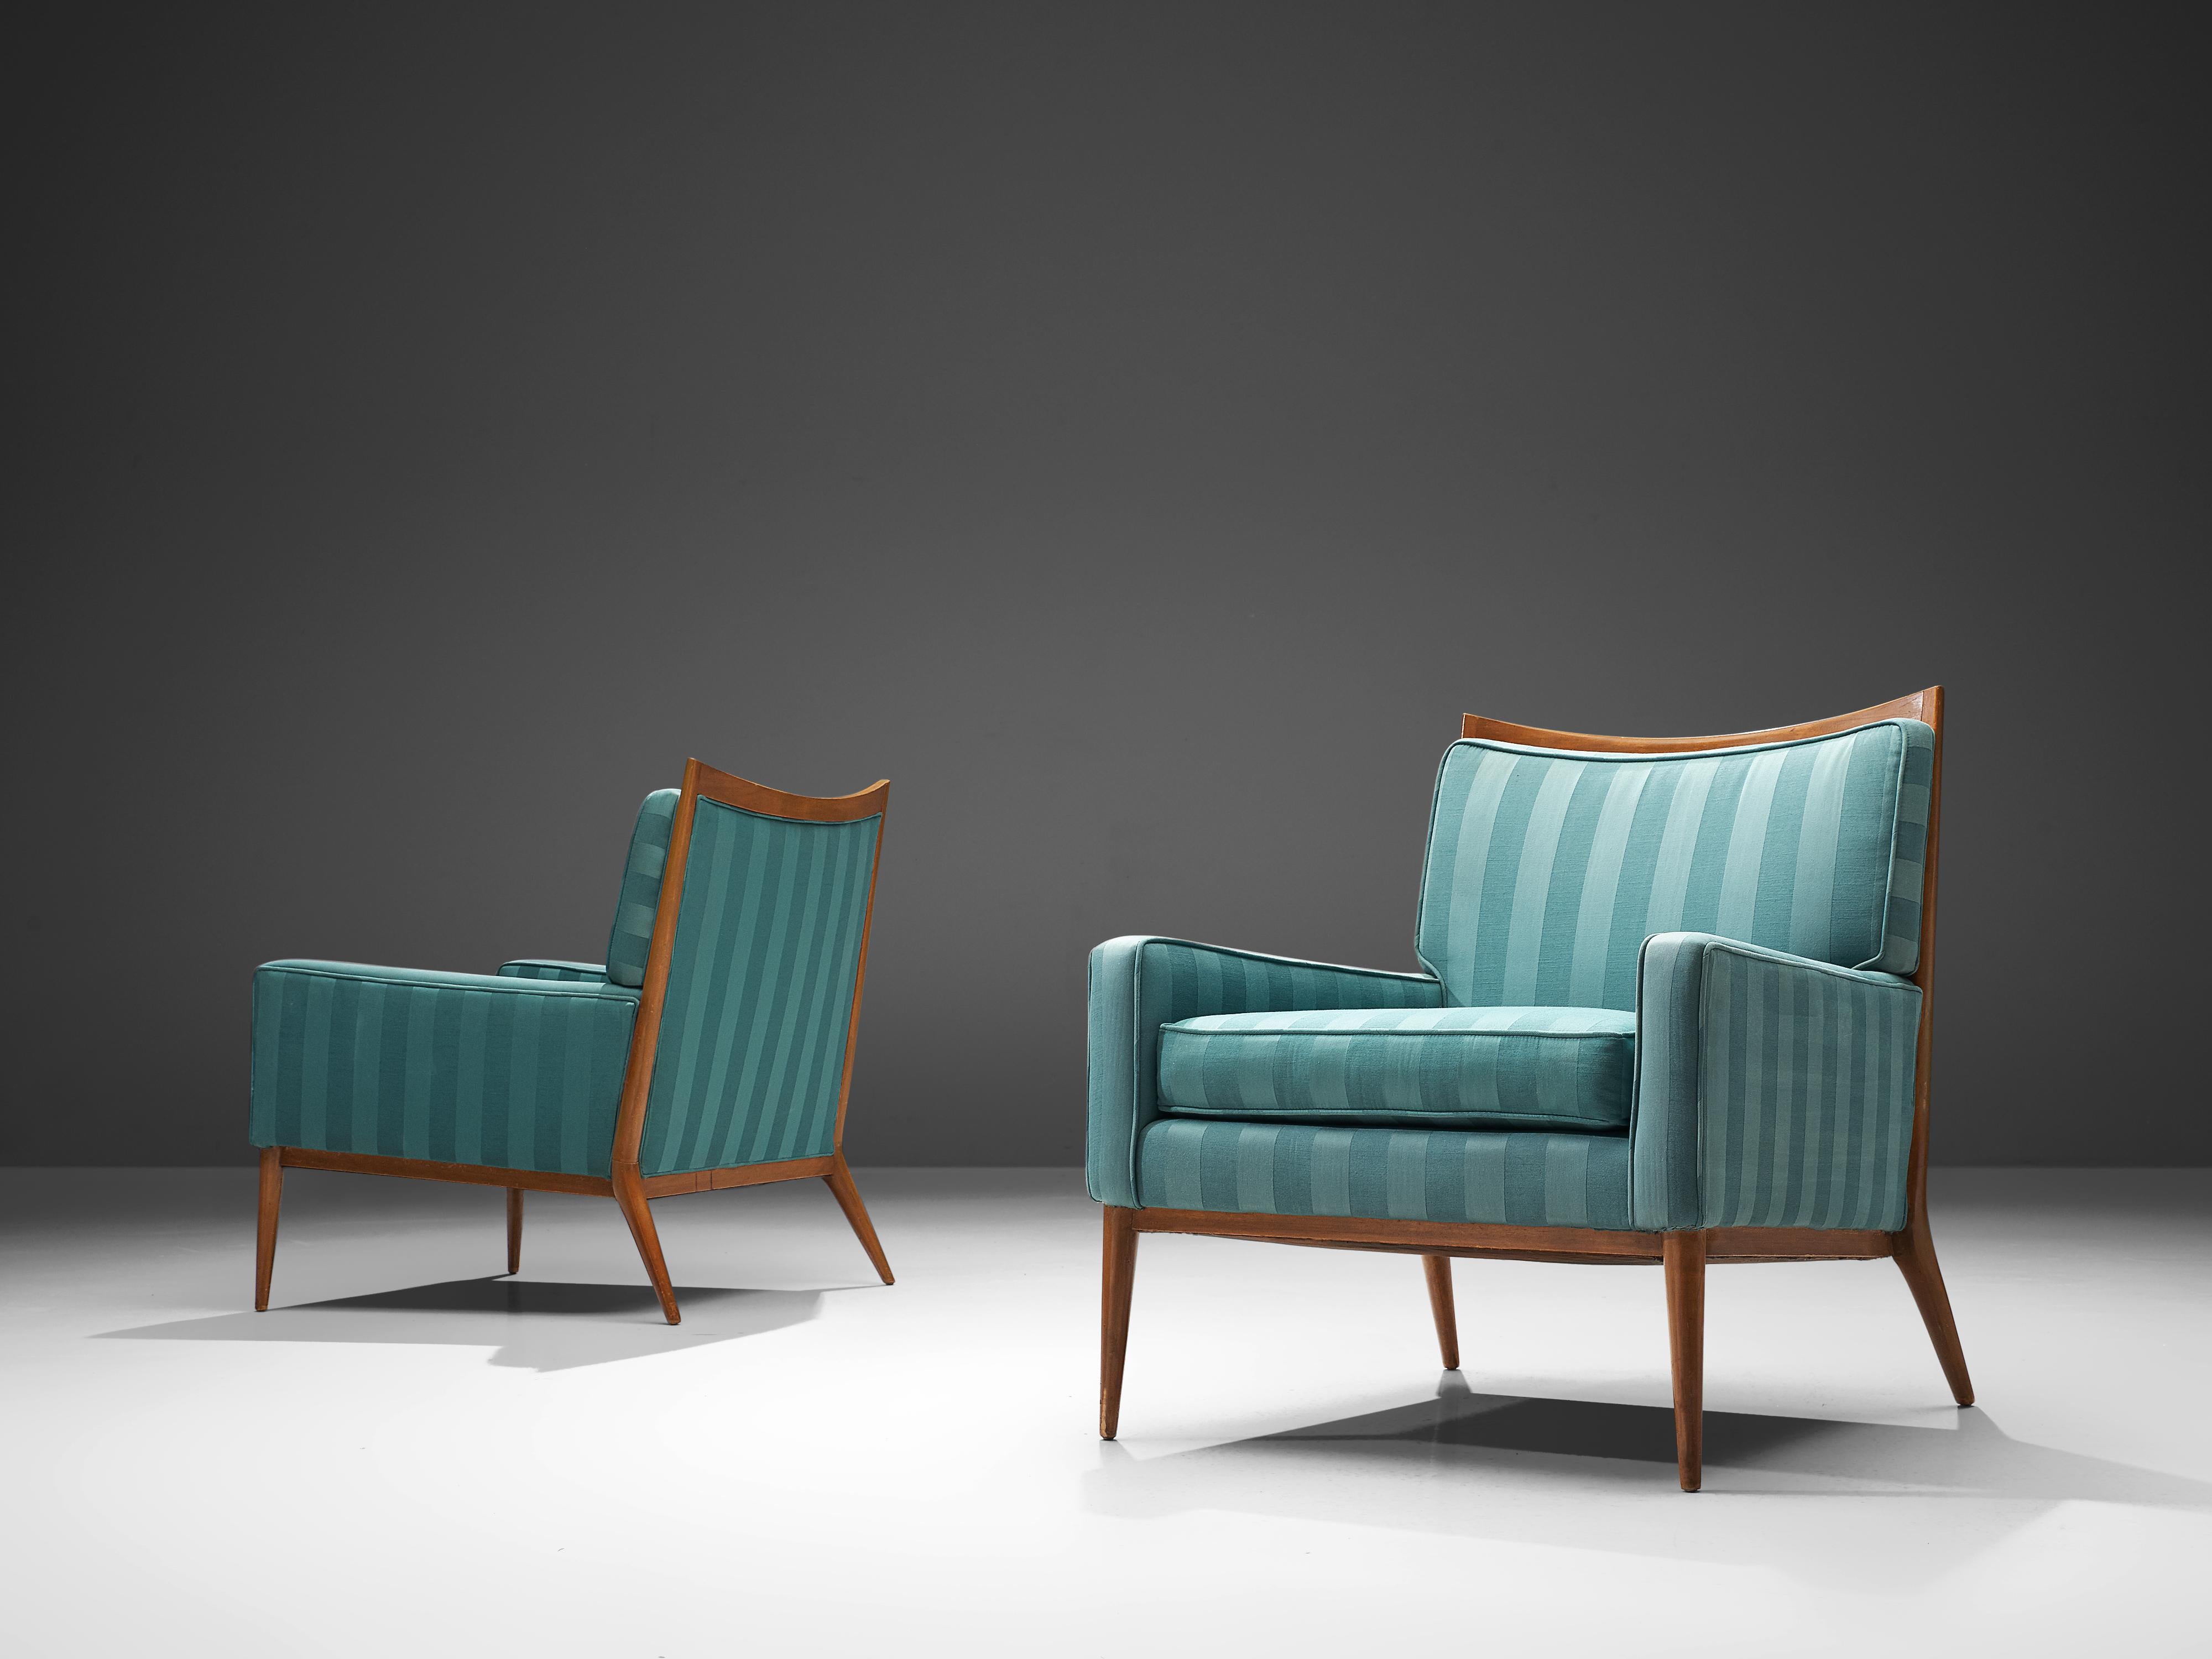 Paul McCobb for Directional Designs, lounge chair model 1322, walnut and blue fabric, 1950s. 

This pair of lounge chairs is designed by Paul McCobb. The quintessential design features of McCobb's furniture is clearly visible in this set such as